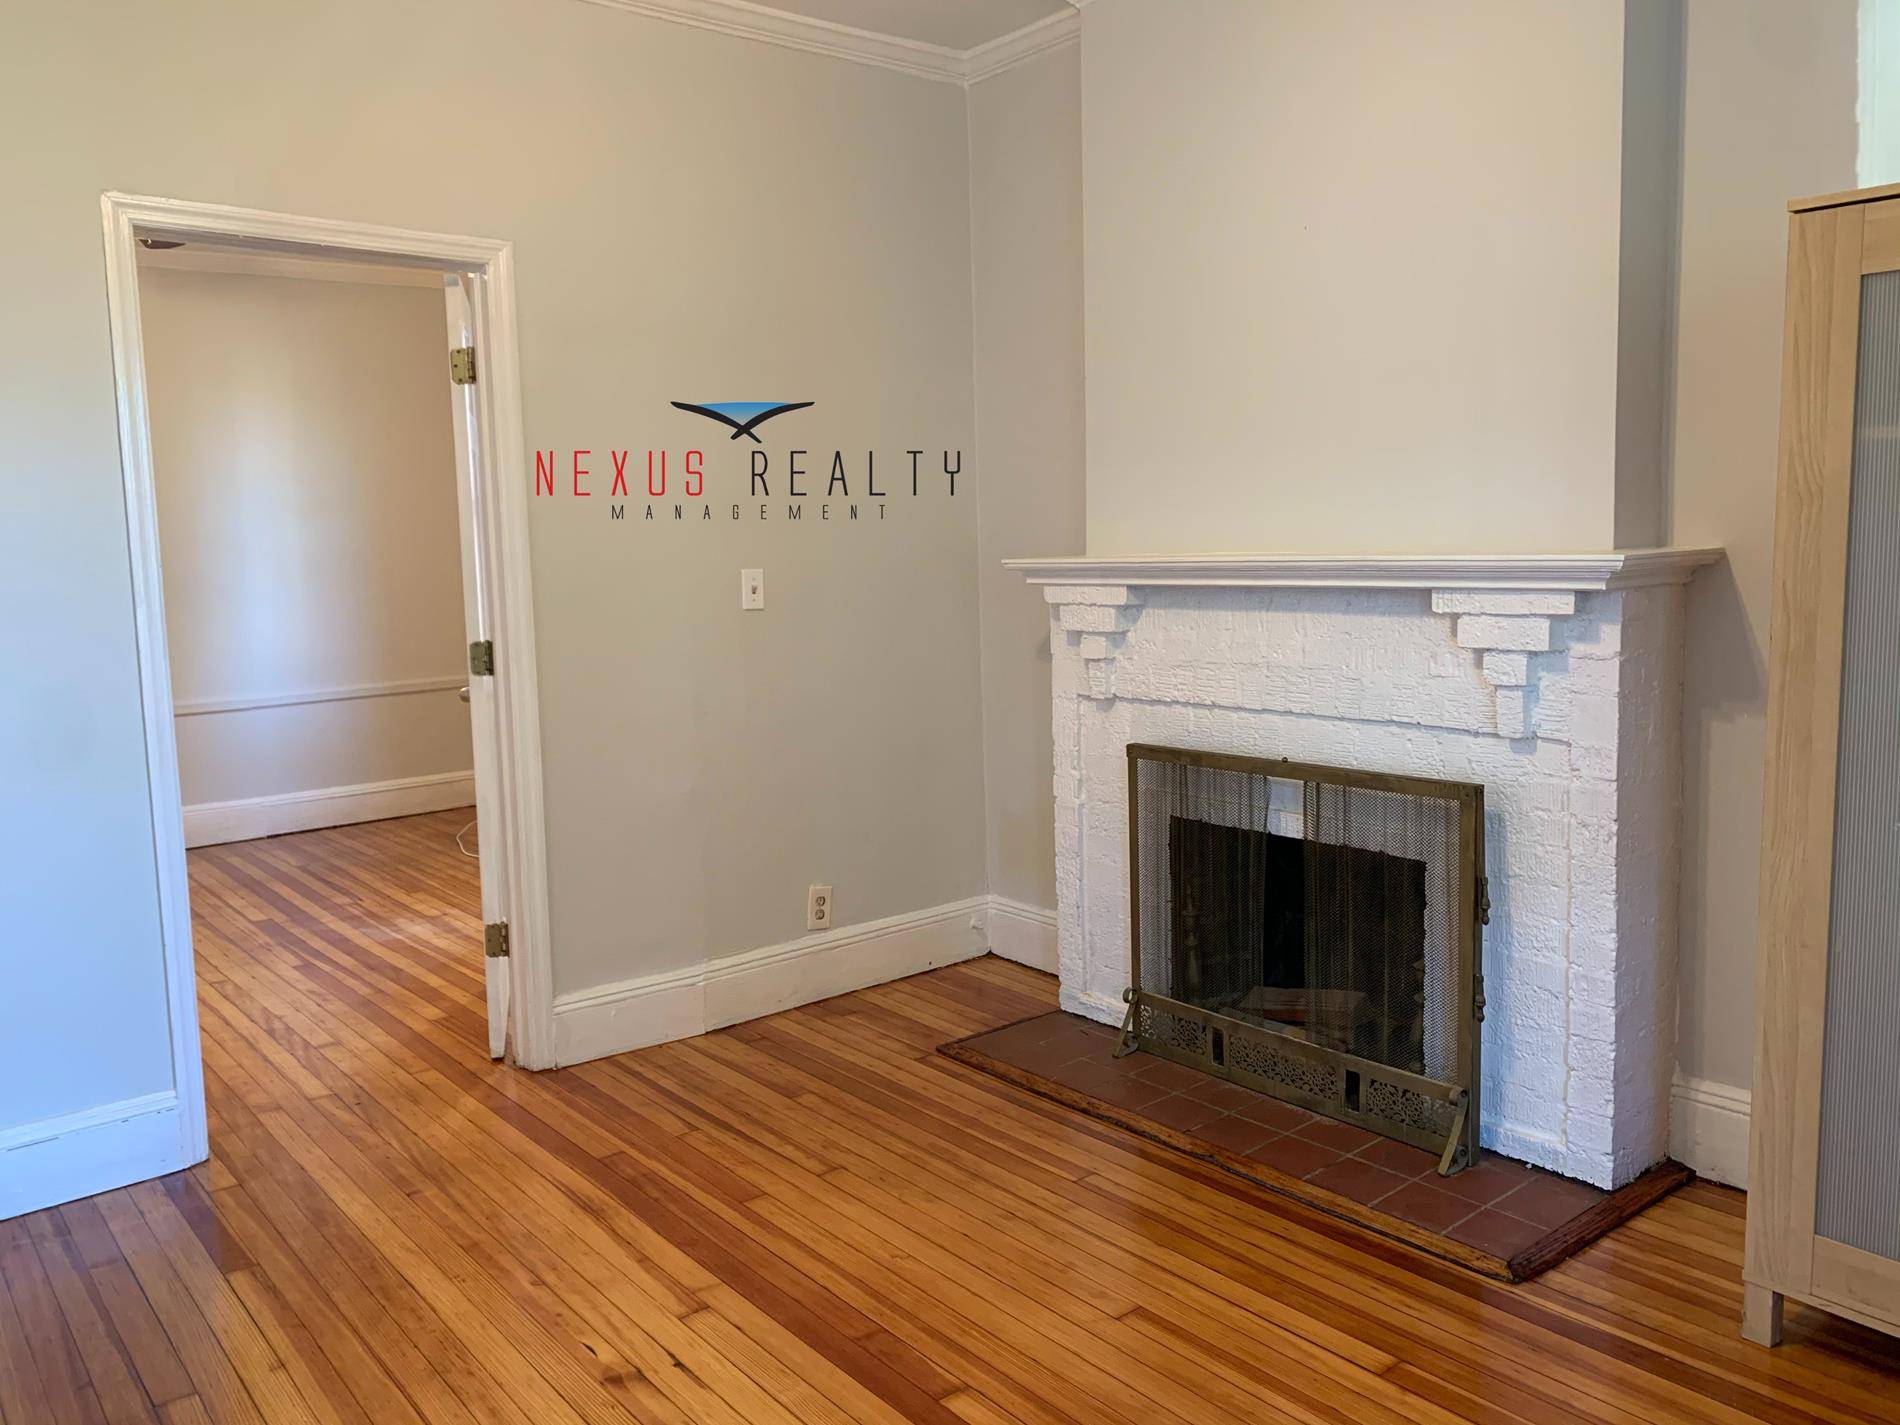 Freshly painted 3 Bedroom apartment in Astoria ONLY 26003 Beautiful bedrooms on the 1st floor in 2 family houseMaster bedroom with fireplaceSpacious Living roomLarge eat in kitchen with plenty of ...